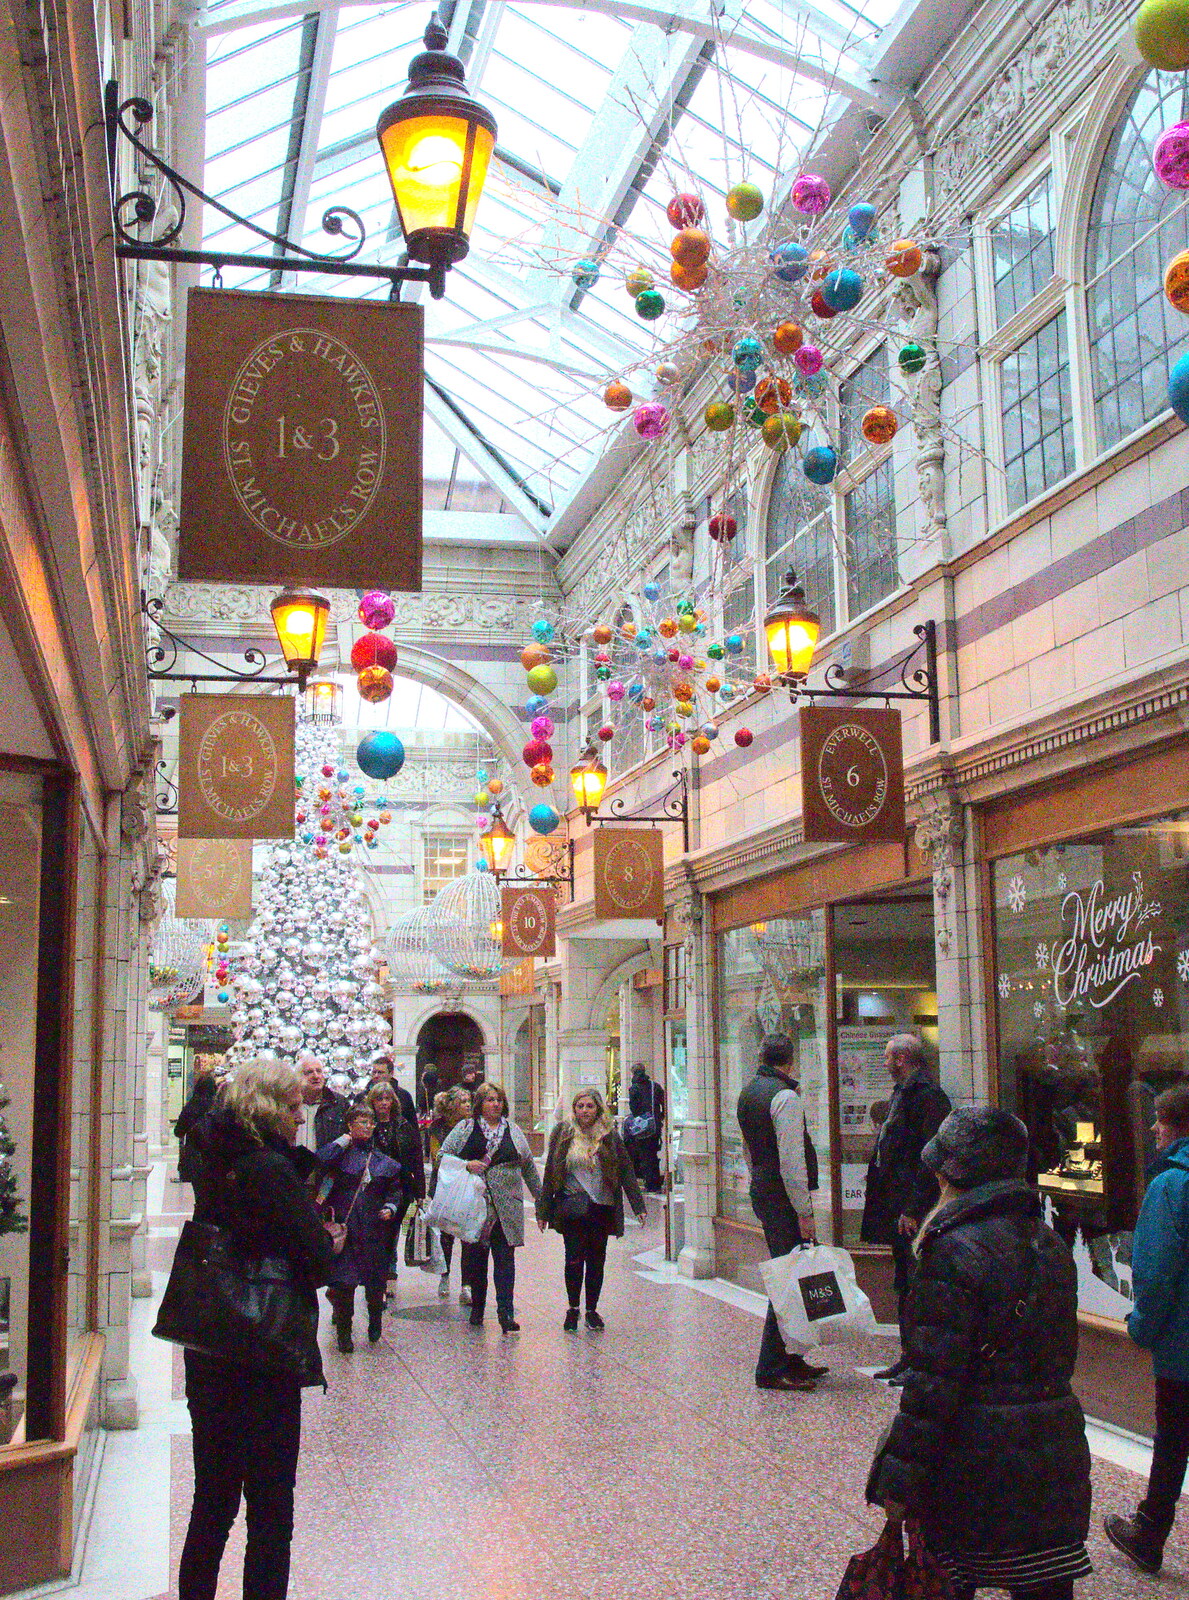 A Chester shopping arcade from A Party and a Road Trip to Chester, Suffolk and Cheshire - 20th December 2015